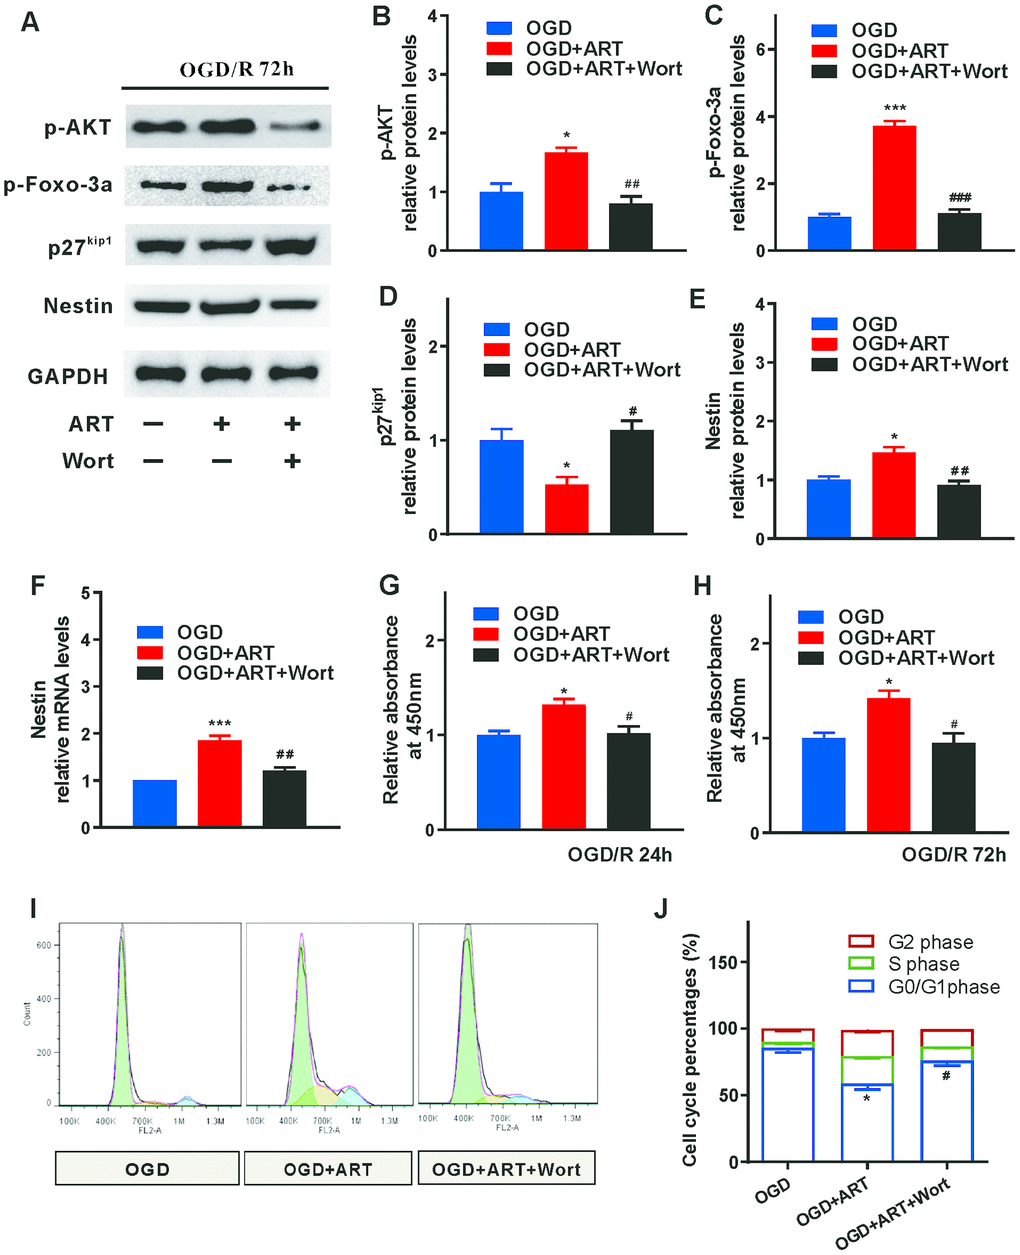 PI3K/Akt/FOXO-3a/p27Kip1 signaling is involved in ART-induced proliferation of NSPCs after OGD/R injury. (A) 72h after OGD/R, western blotting was performed in control (OGD), ART-treated (OGD+ART) and ART and wortmannin-treated (OGD+ART+Wort) group. (B–E) The expression levels of p-AKT, p-FOXO-3a, p27kip1, and Nestin were examined. (F) RT-qPCR was used to evaluate the expression of Nestin in NSPCs of different groups. (G, H) CCK8 was used to examine the proliferation of NSPCs at 24 h and 72h after OGD/R injury. (I, J) Flow cytometric analysis was carried out to determine the cell cycle progression of NSPCs 72h post-OGD/R injury. Data are shown as the mean ± SEM (*p#p##p###p